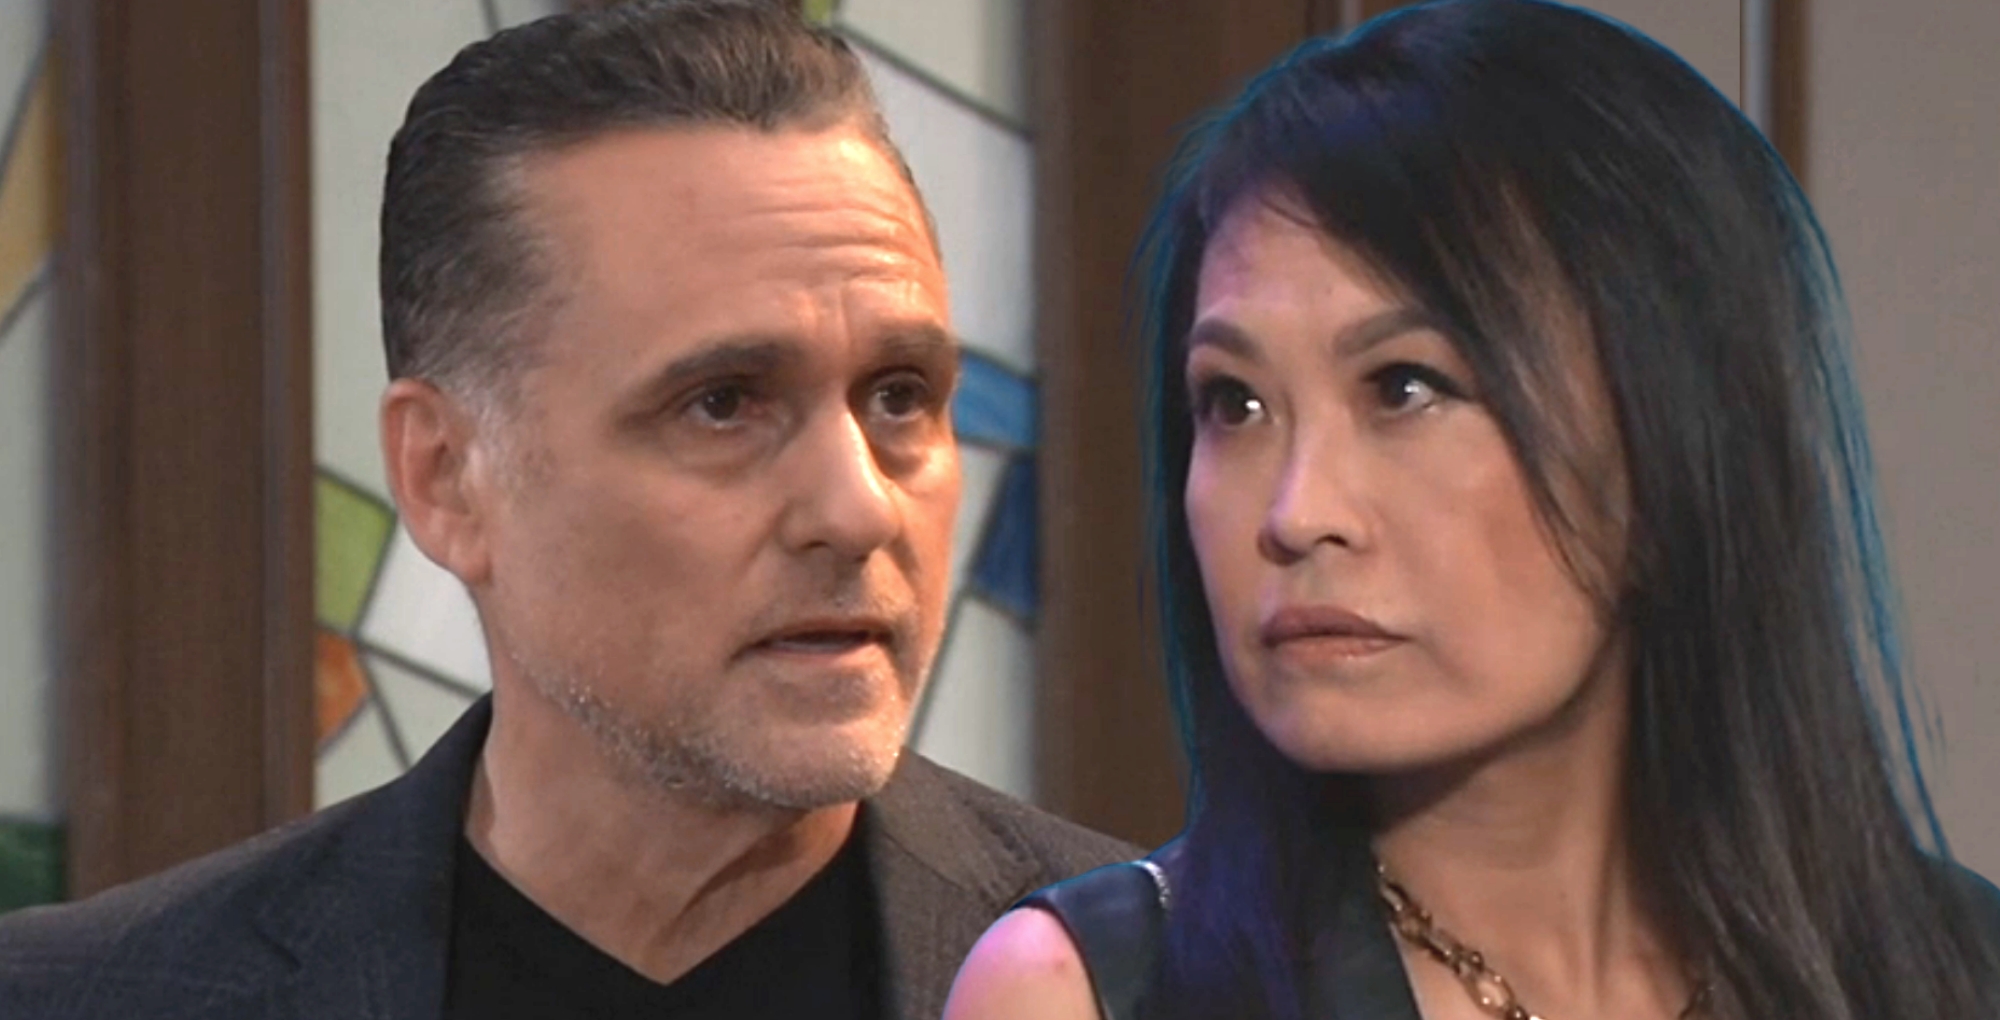 gh spoilers speculation that sonny corinthos may have a challenger in selina wu.